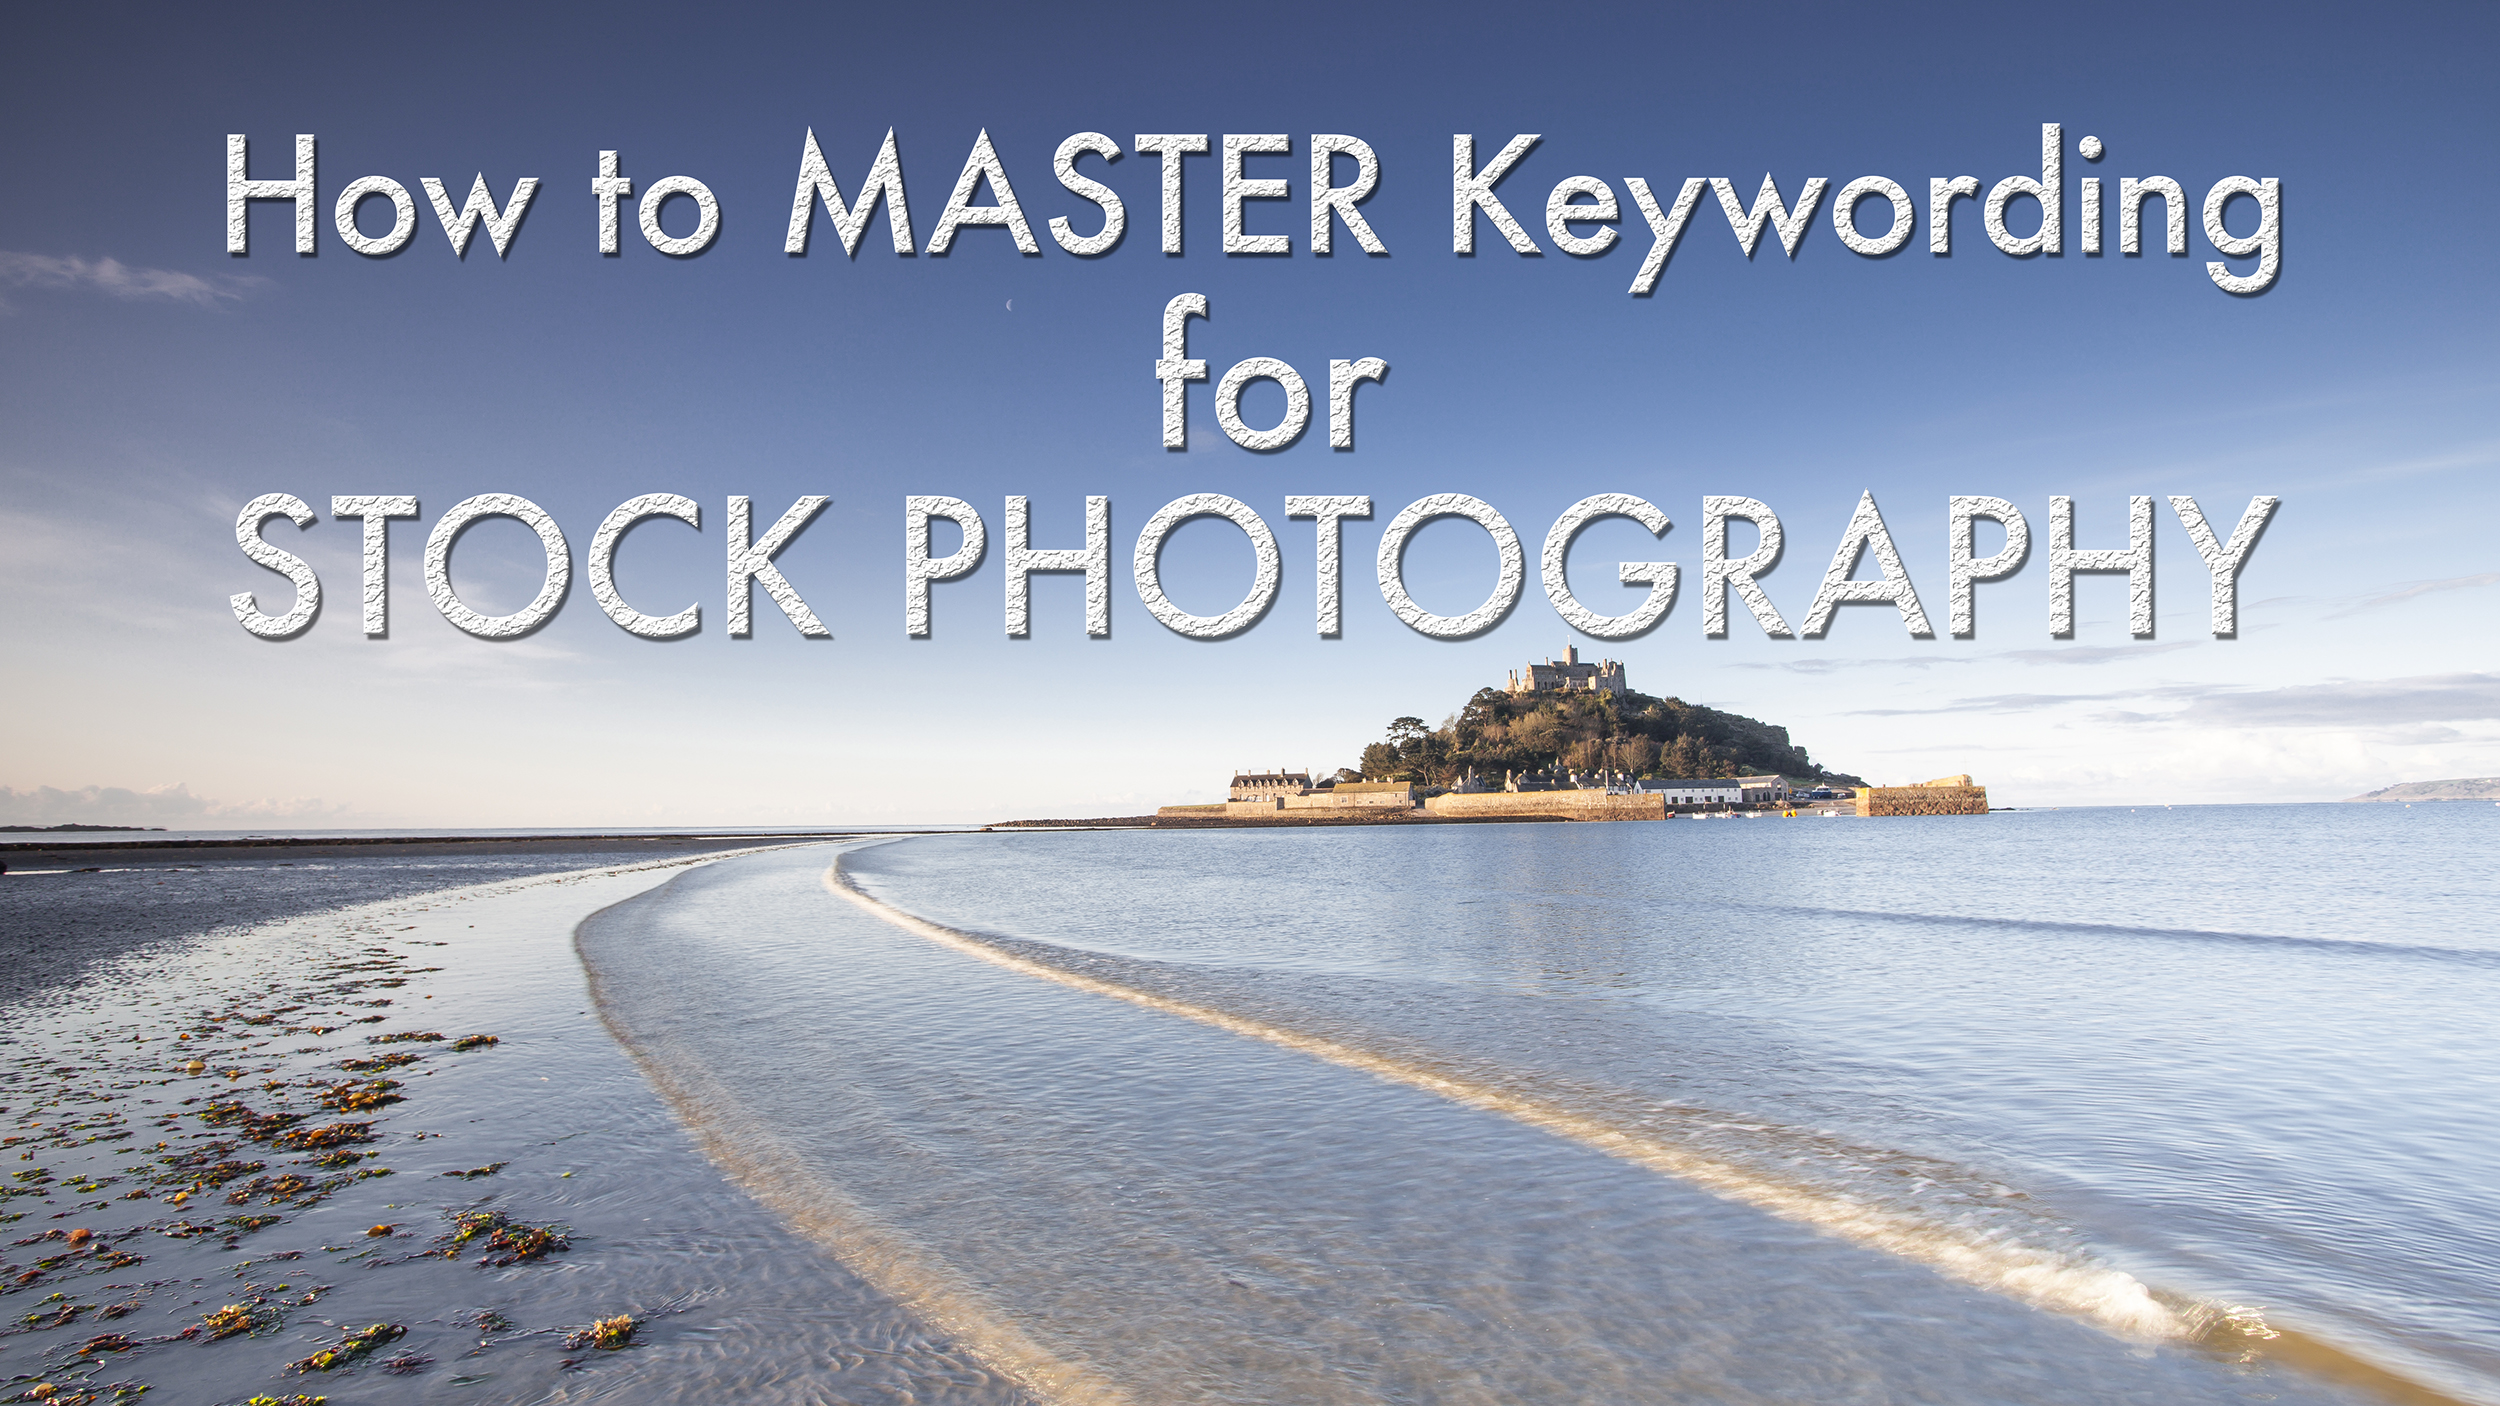 How to master keywording for stock photography.